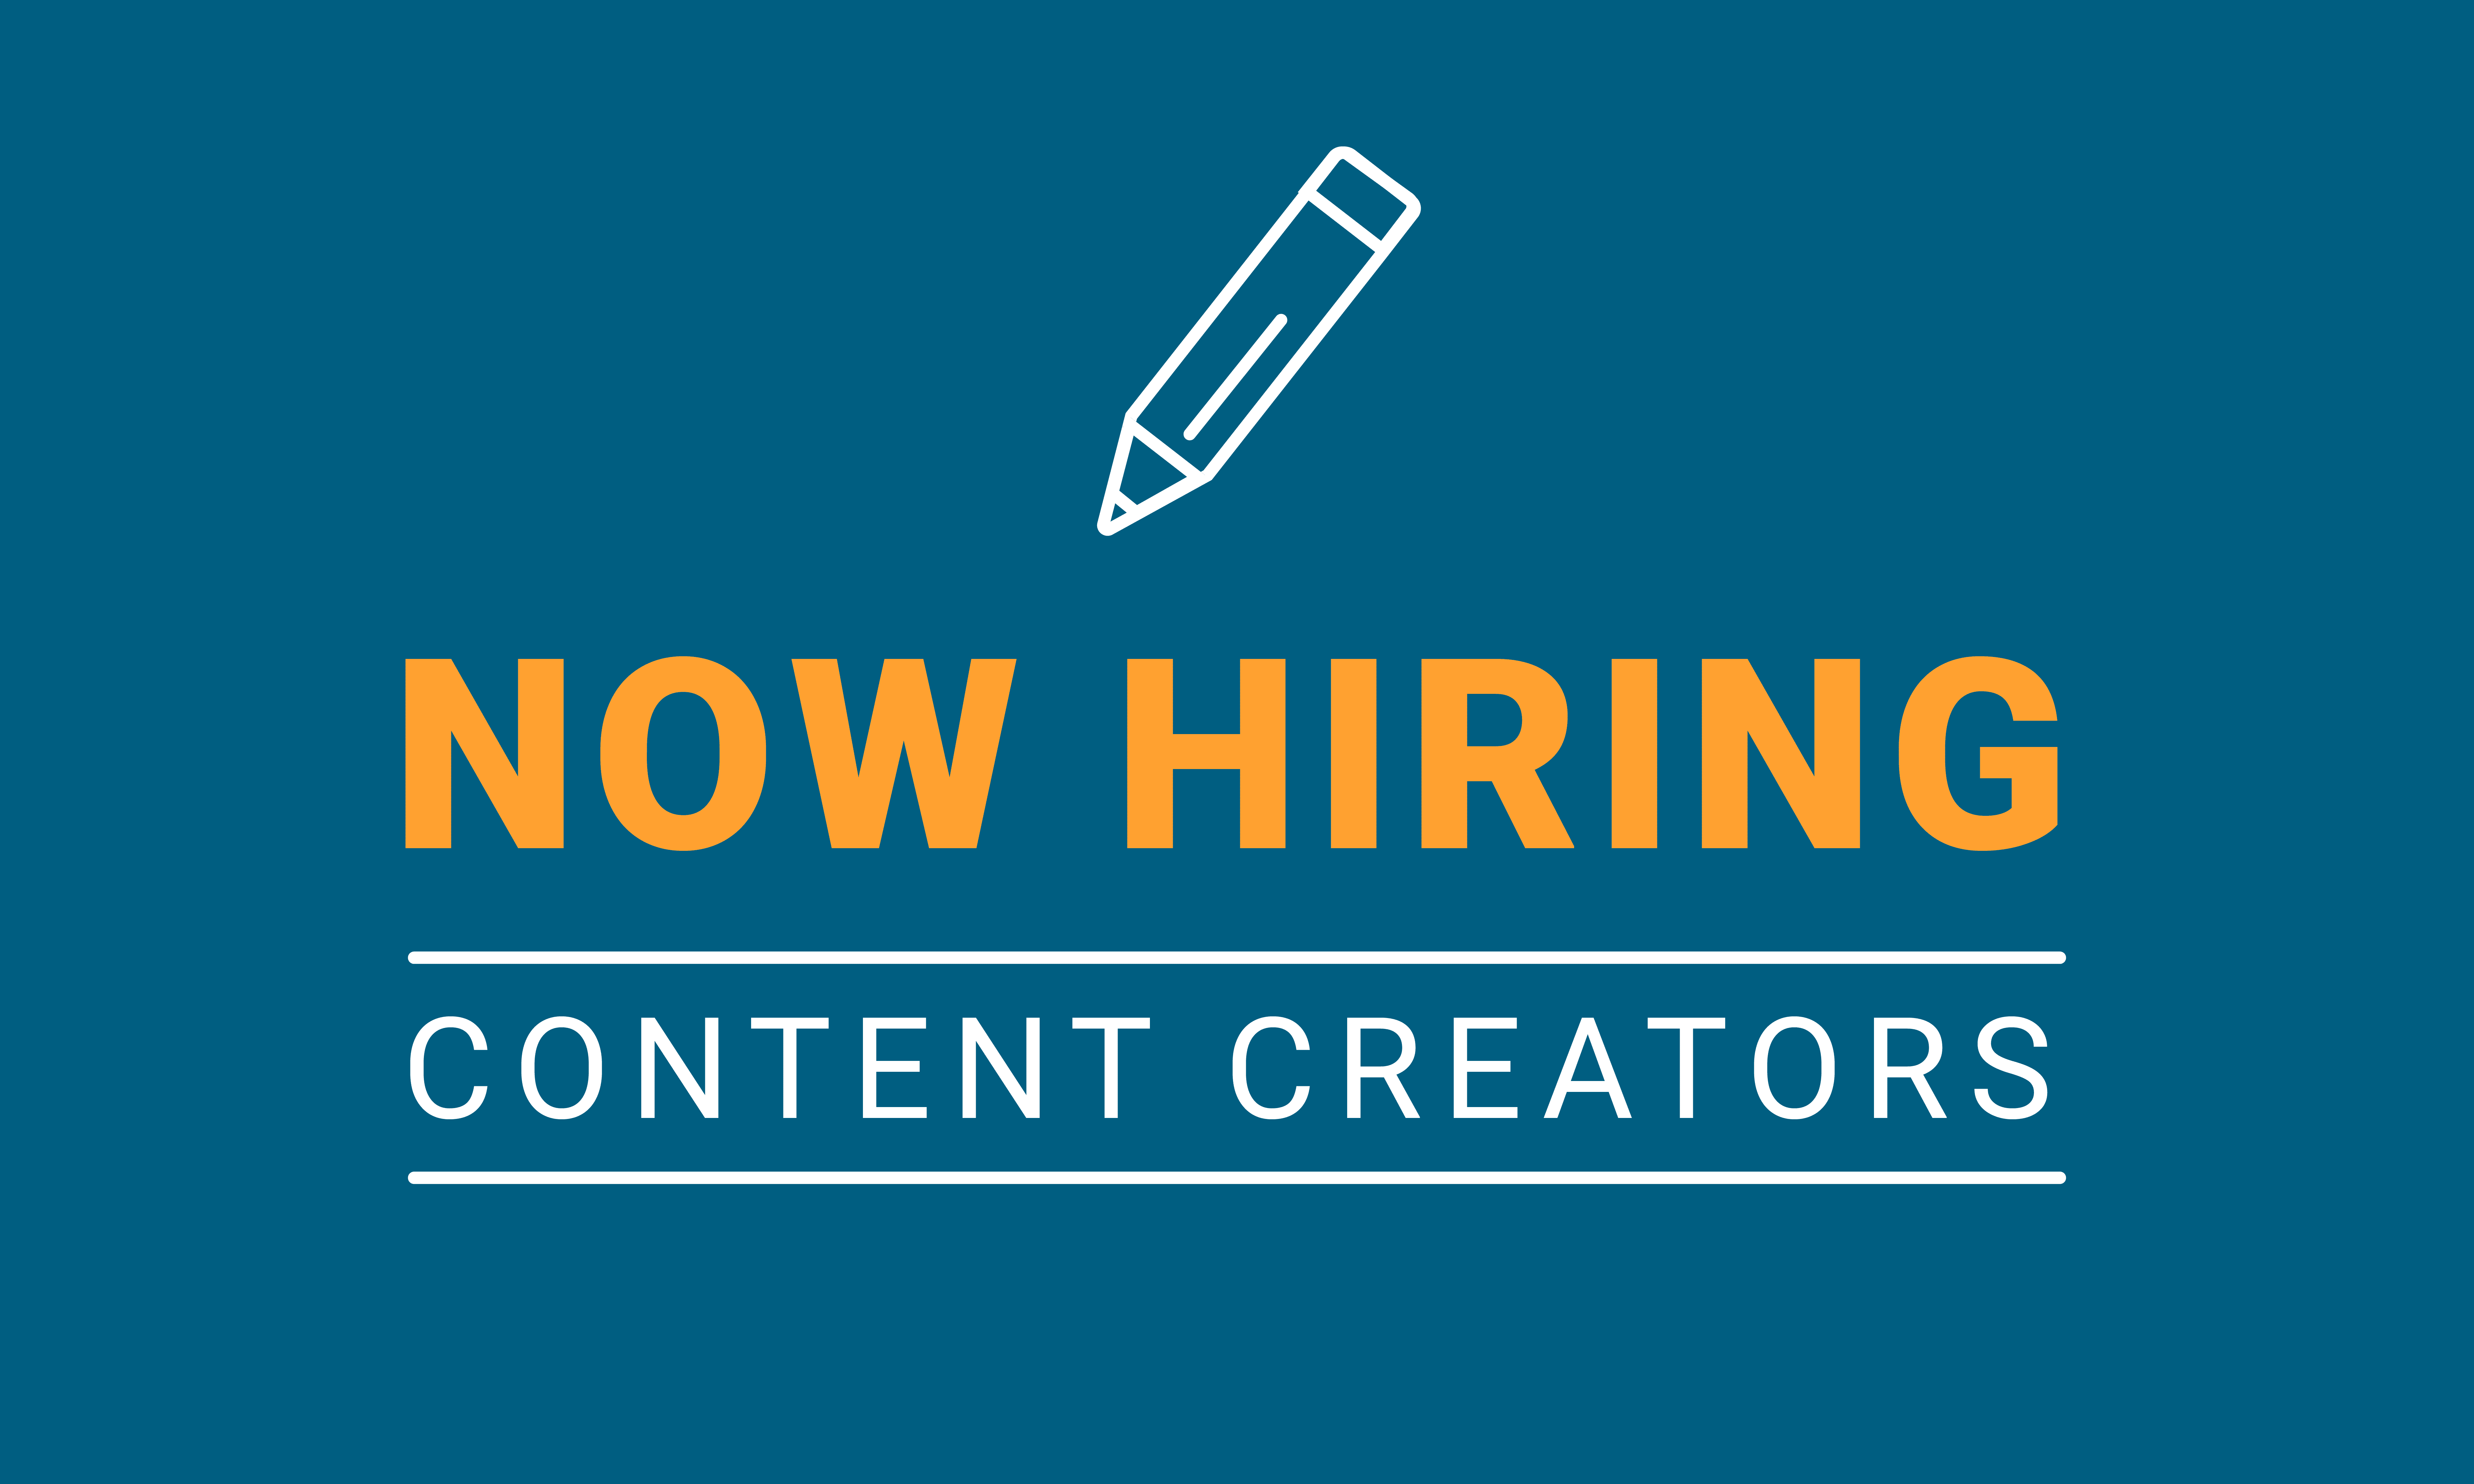 Step on Up Content Creators – We’re Hiring